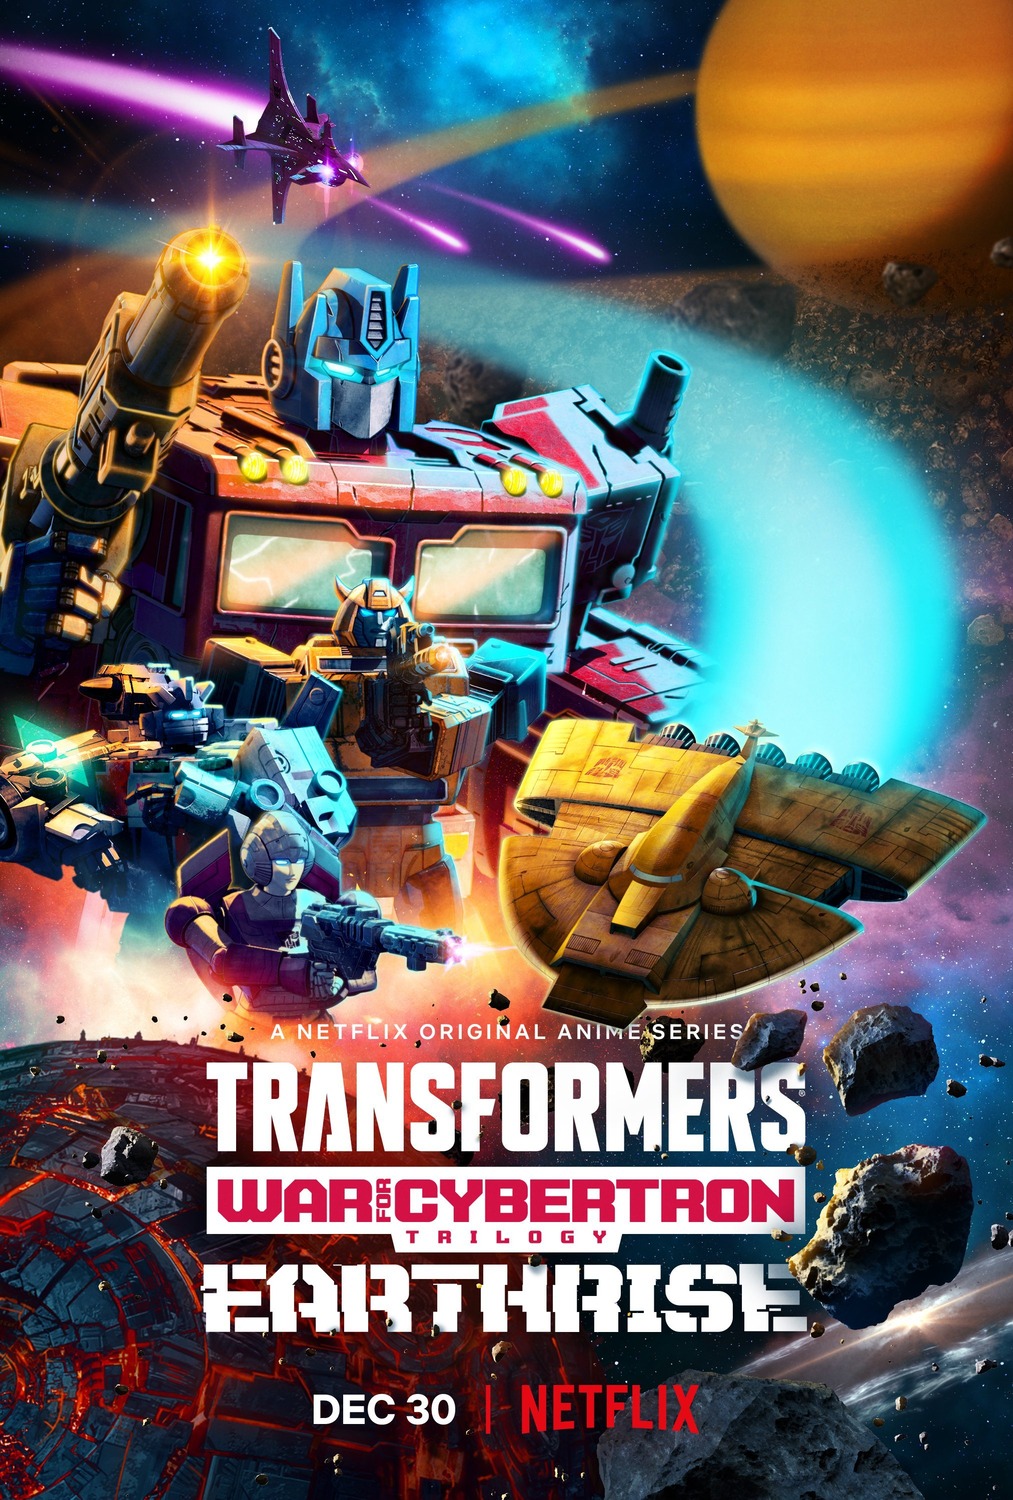 Extra Large TV Poster Image for Transformers: War for Cybertron Trilogy (#12 of 15)